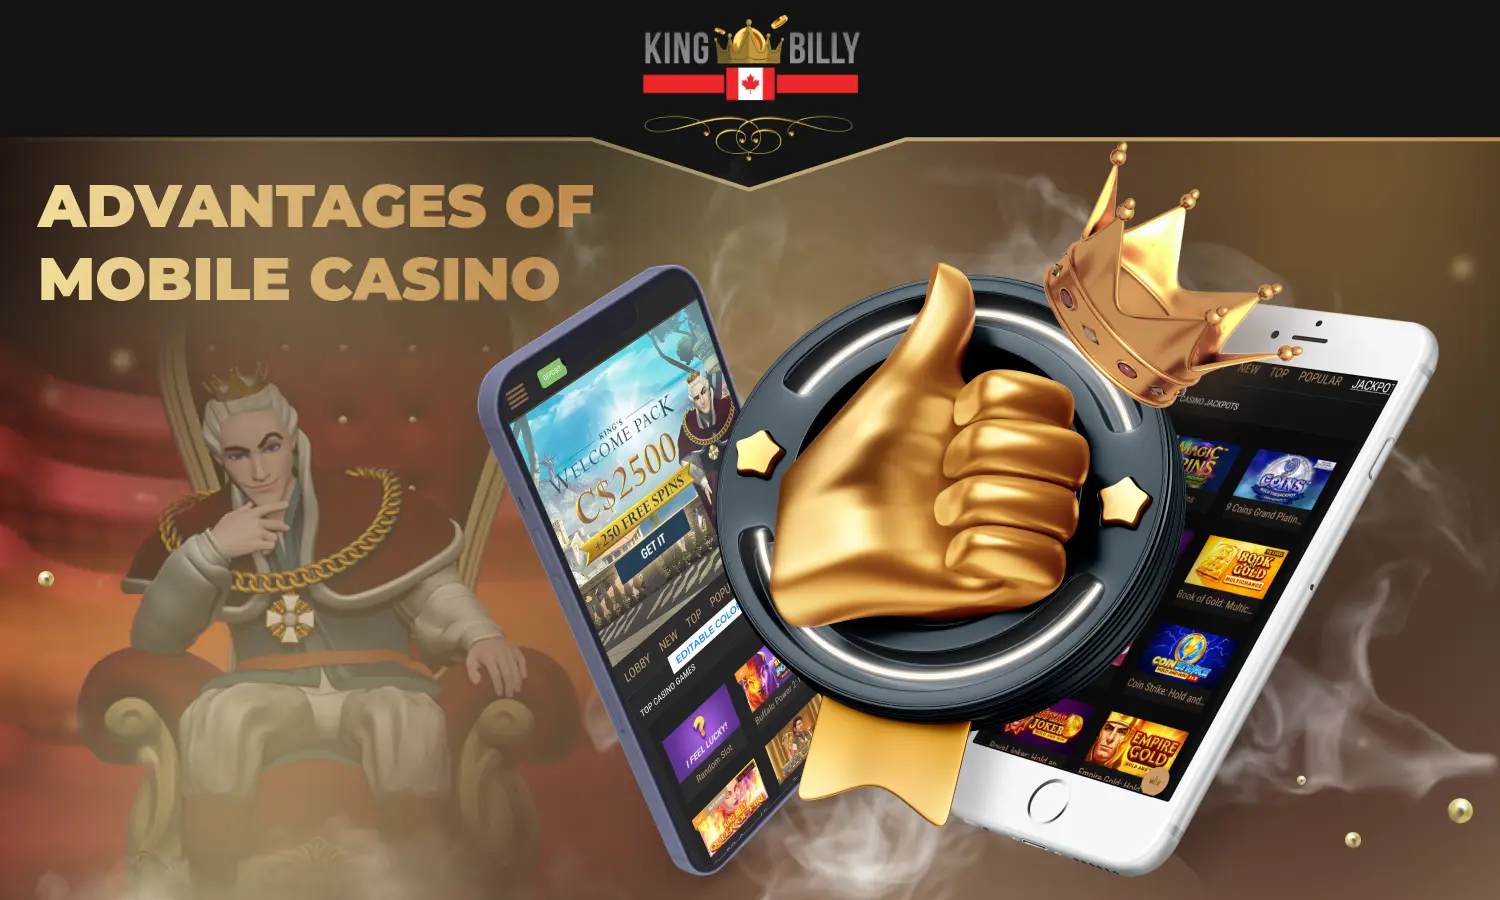 King Billy mobile casino has many advantages for canadian users